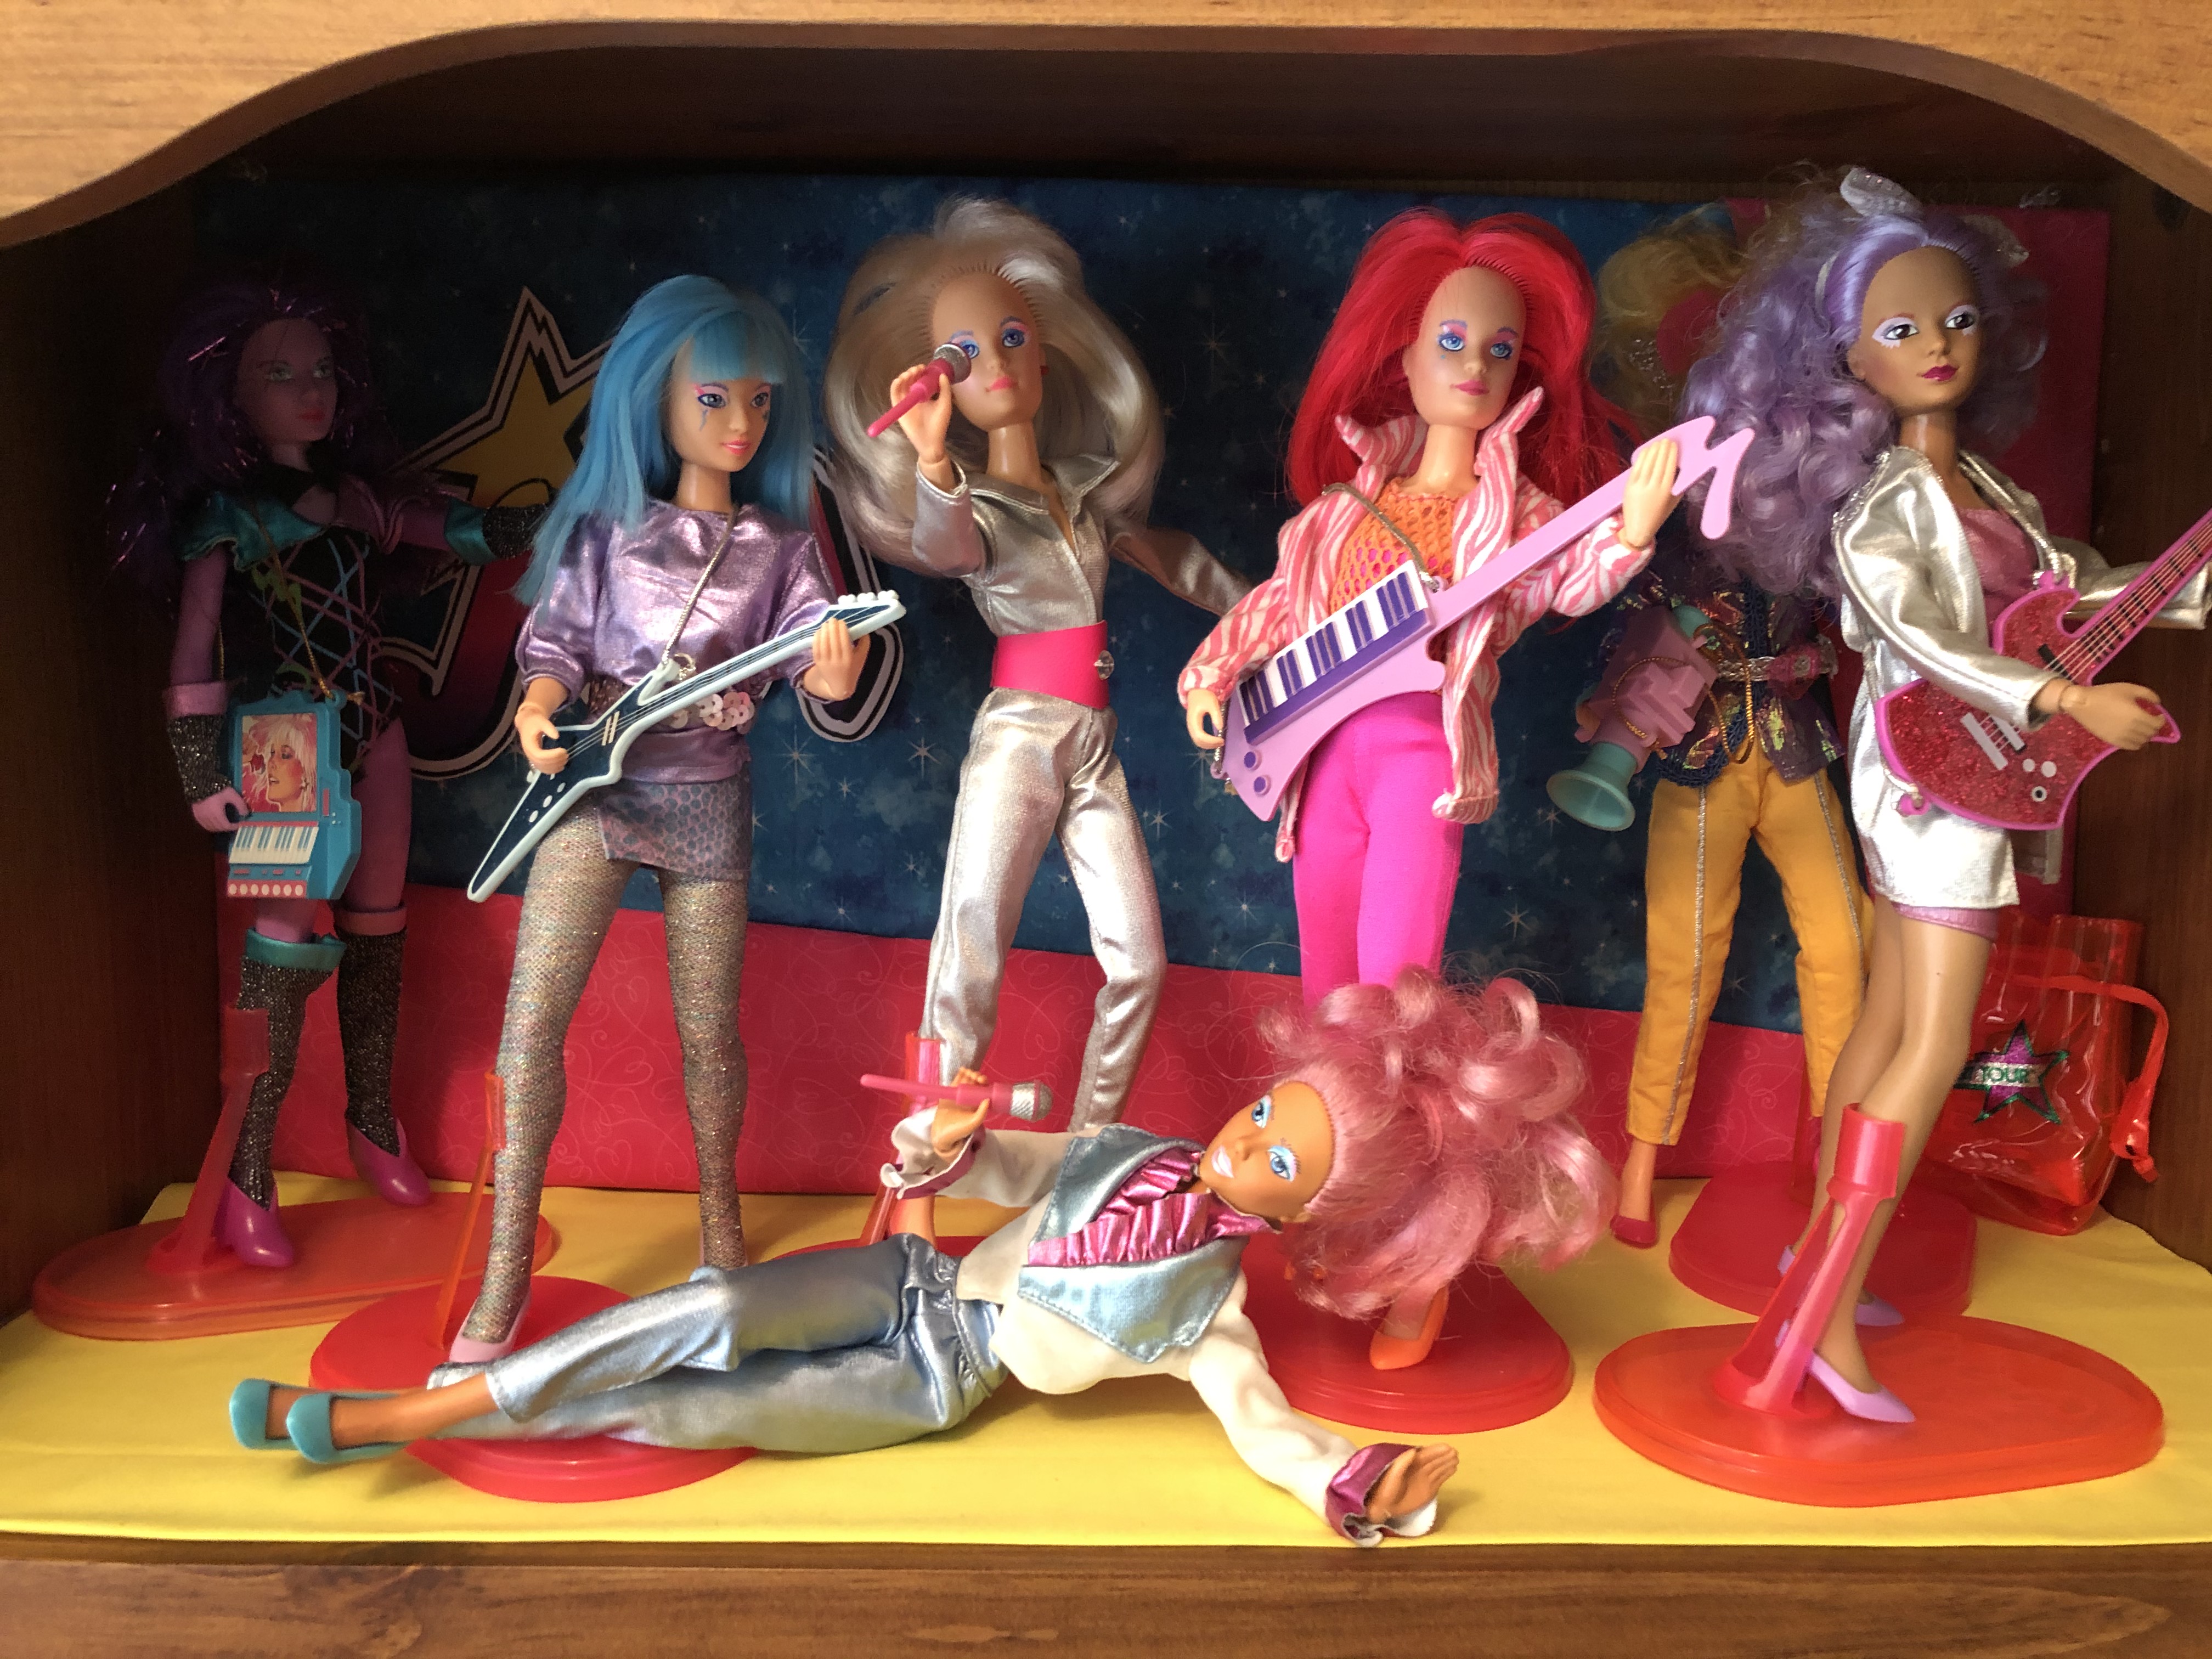 Jem and the Holograms preening in full rockstar mode as only they can